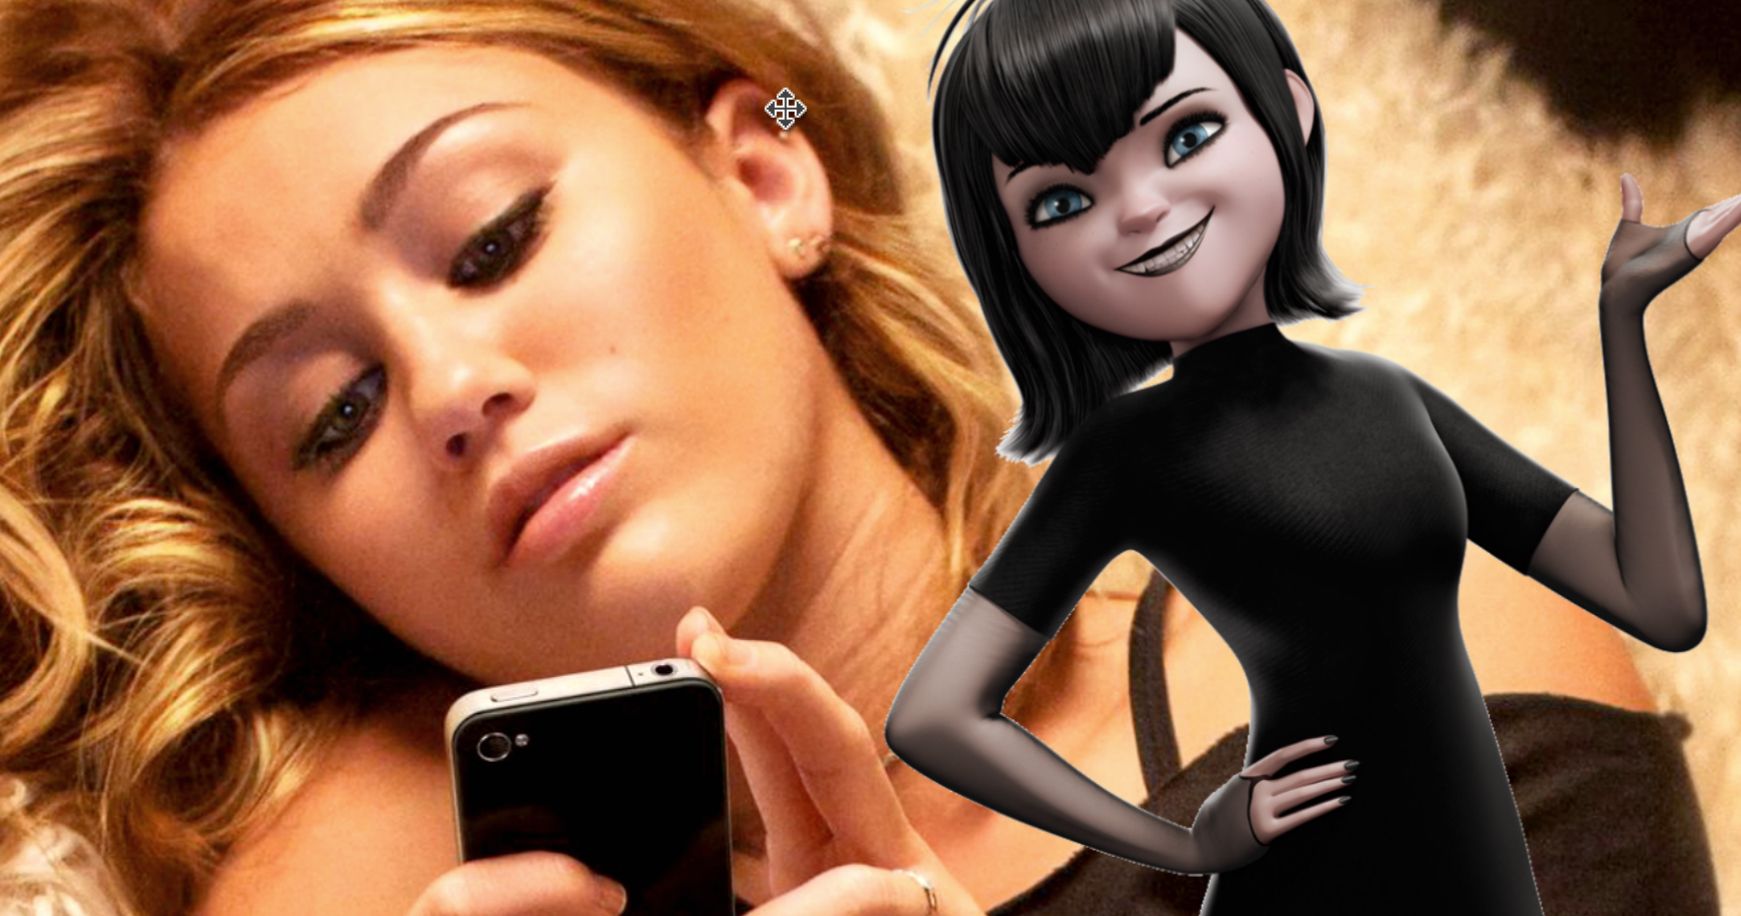 Hotel Transylvania Fired Miley Cyrus Over Adult-Themed Cake Photos